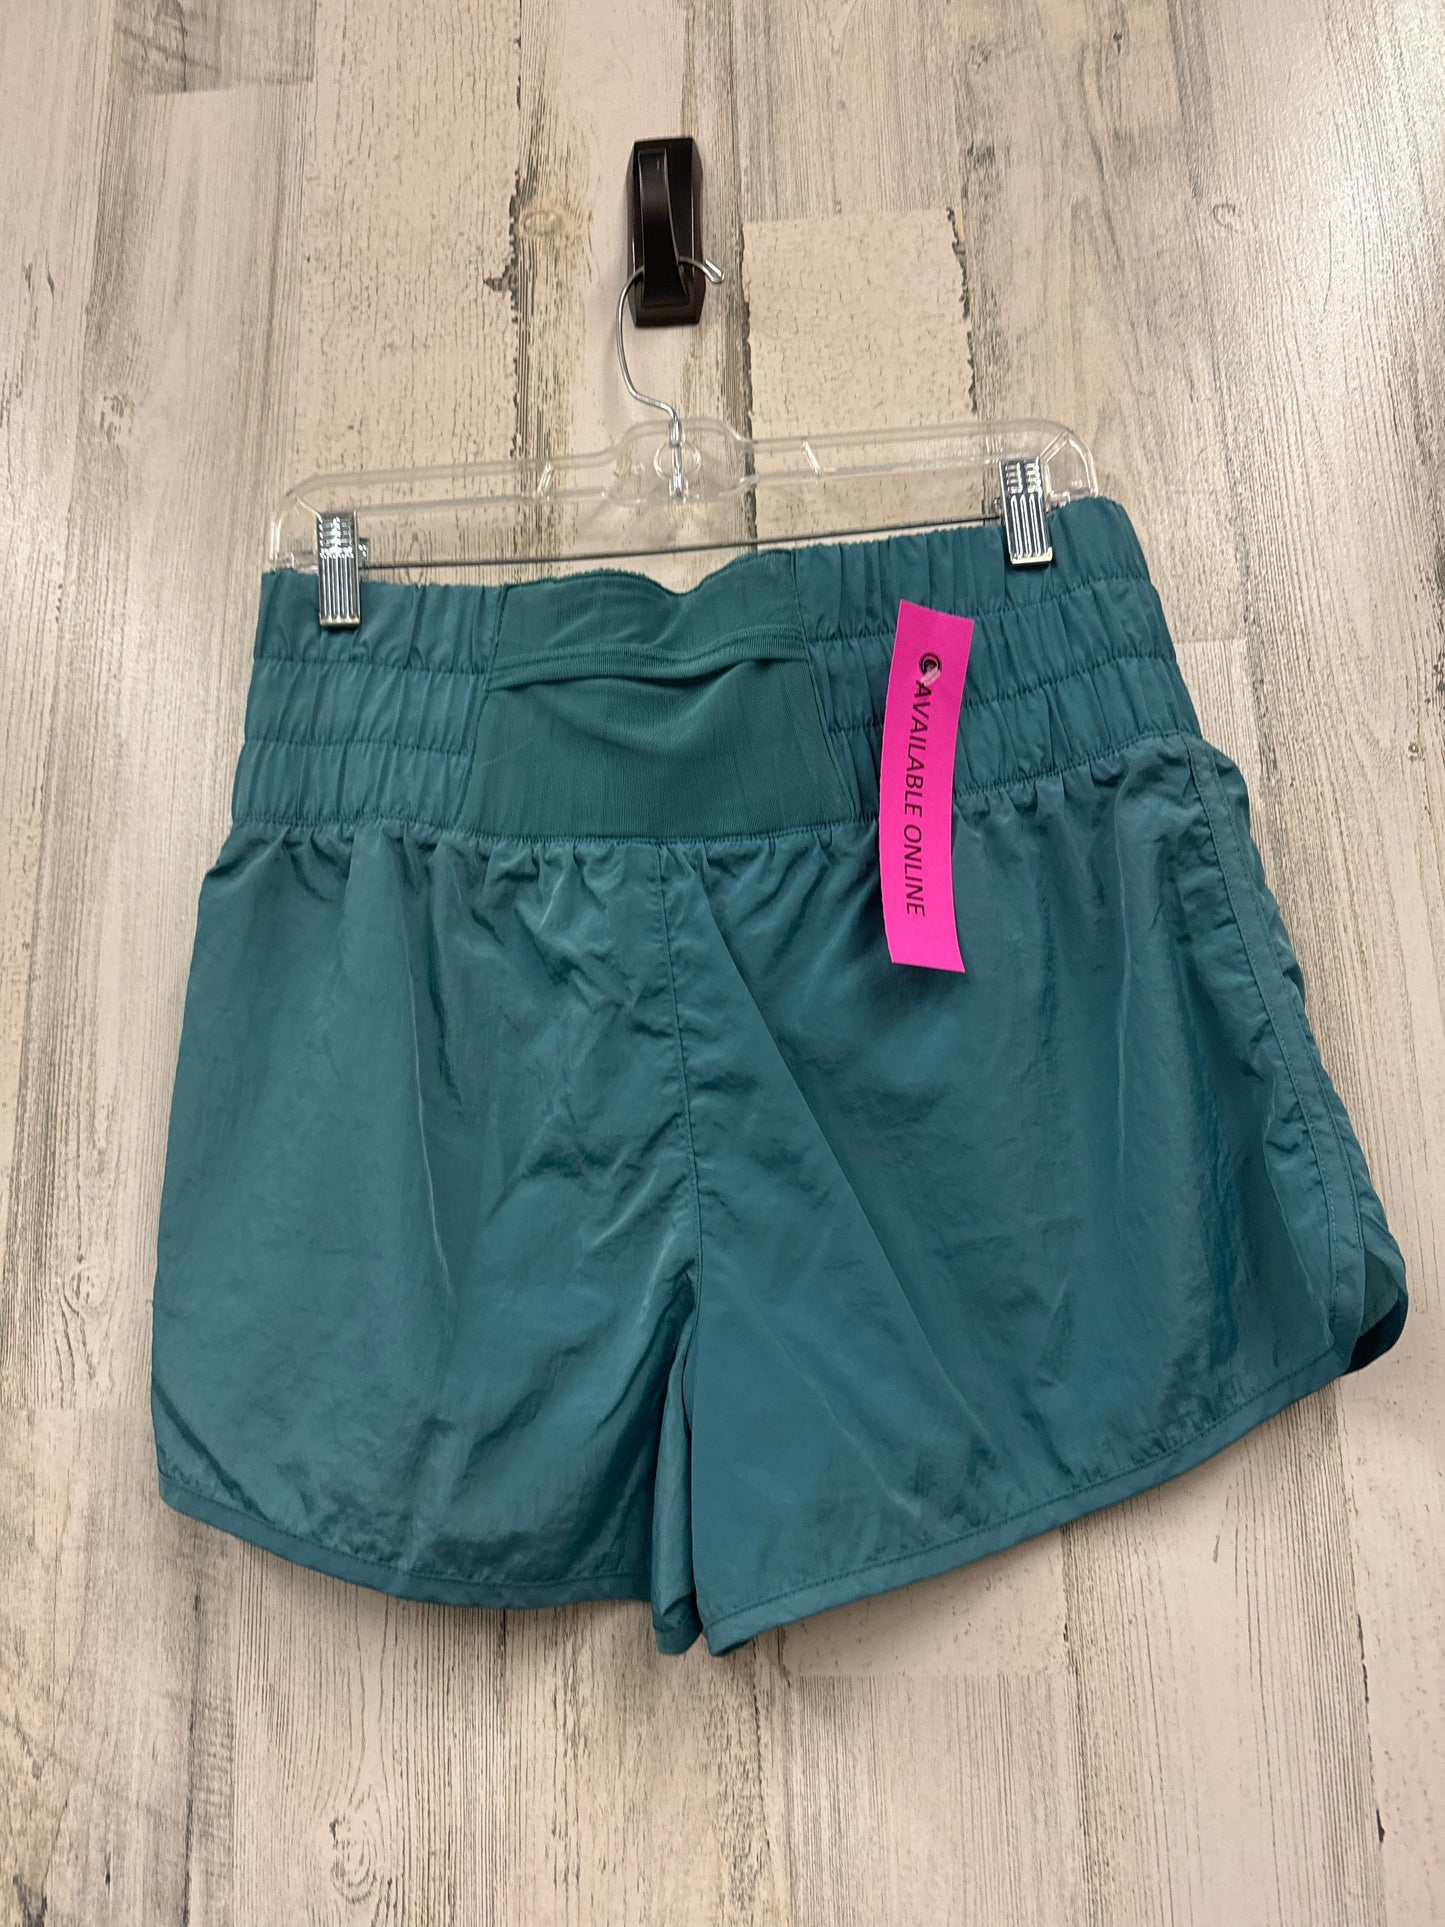 Athletic Shorts By Dip  Size: M